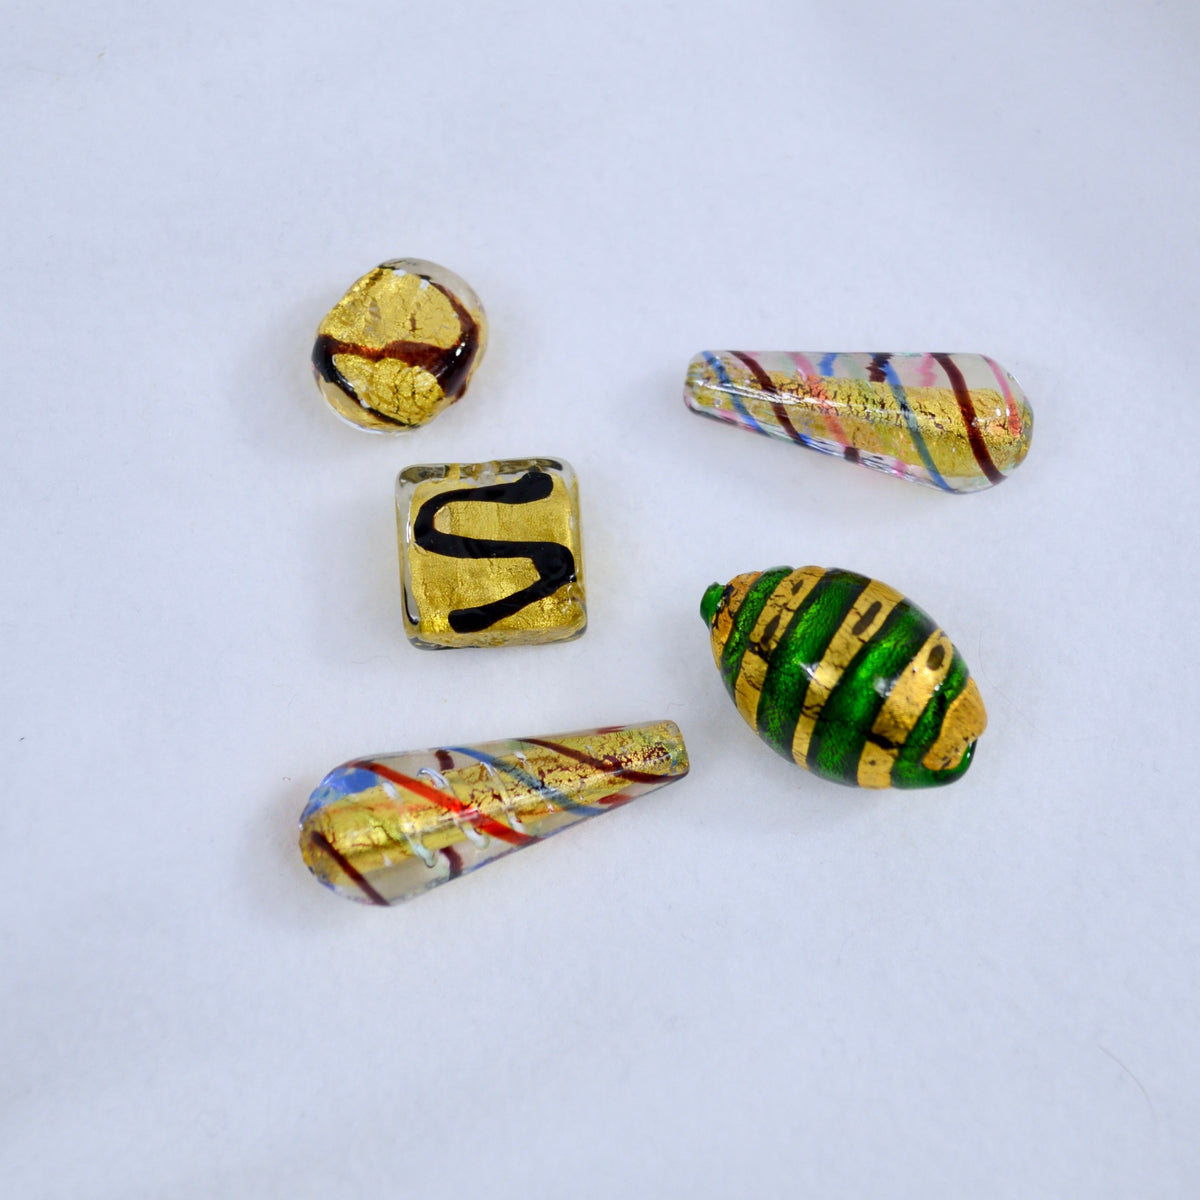 Murano Glass Beads, Assorted Striped, Set of 5, Made in Italy - My Italian Decor